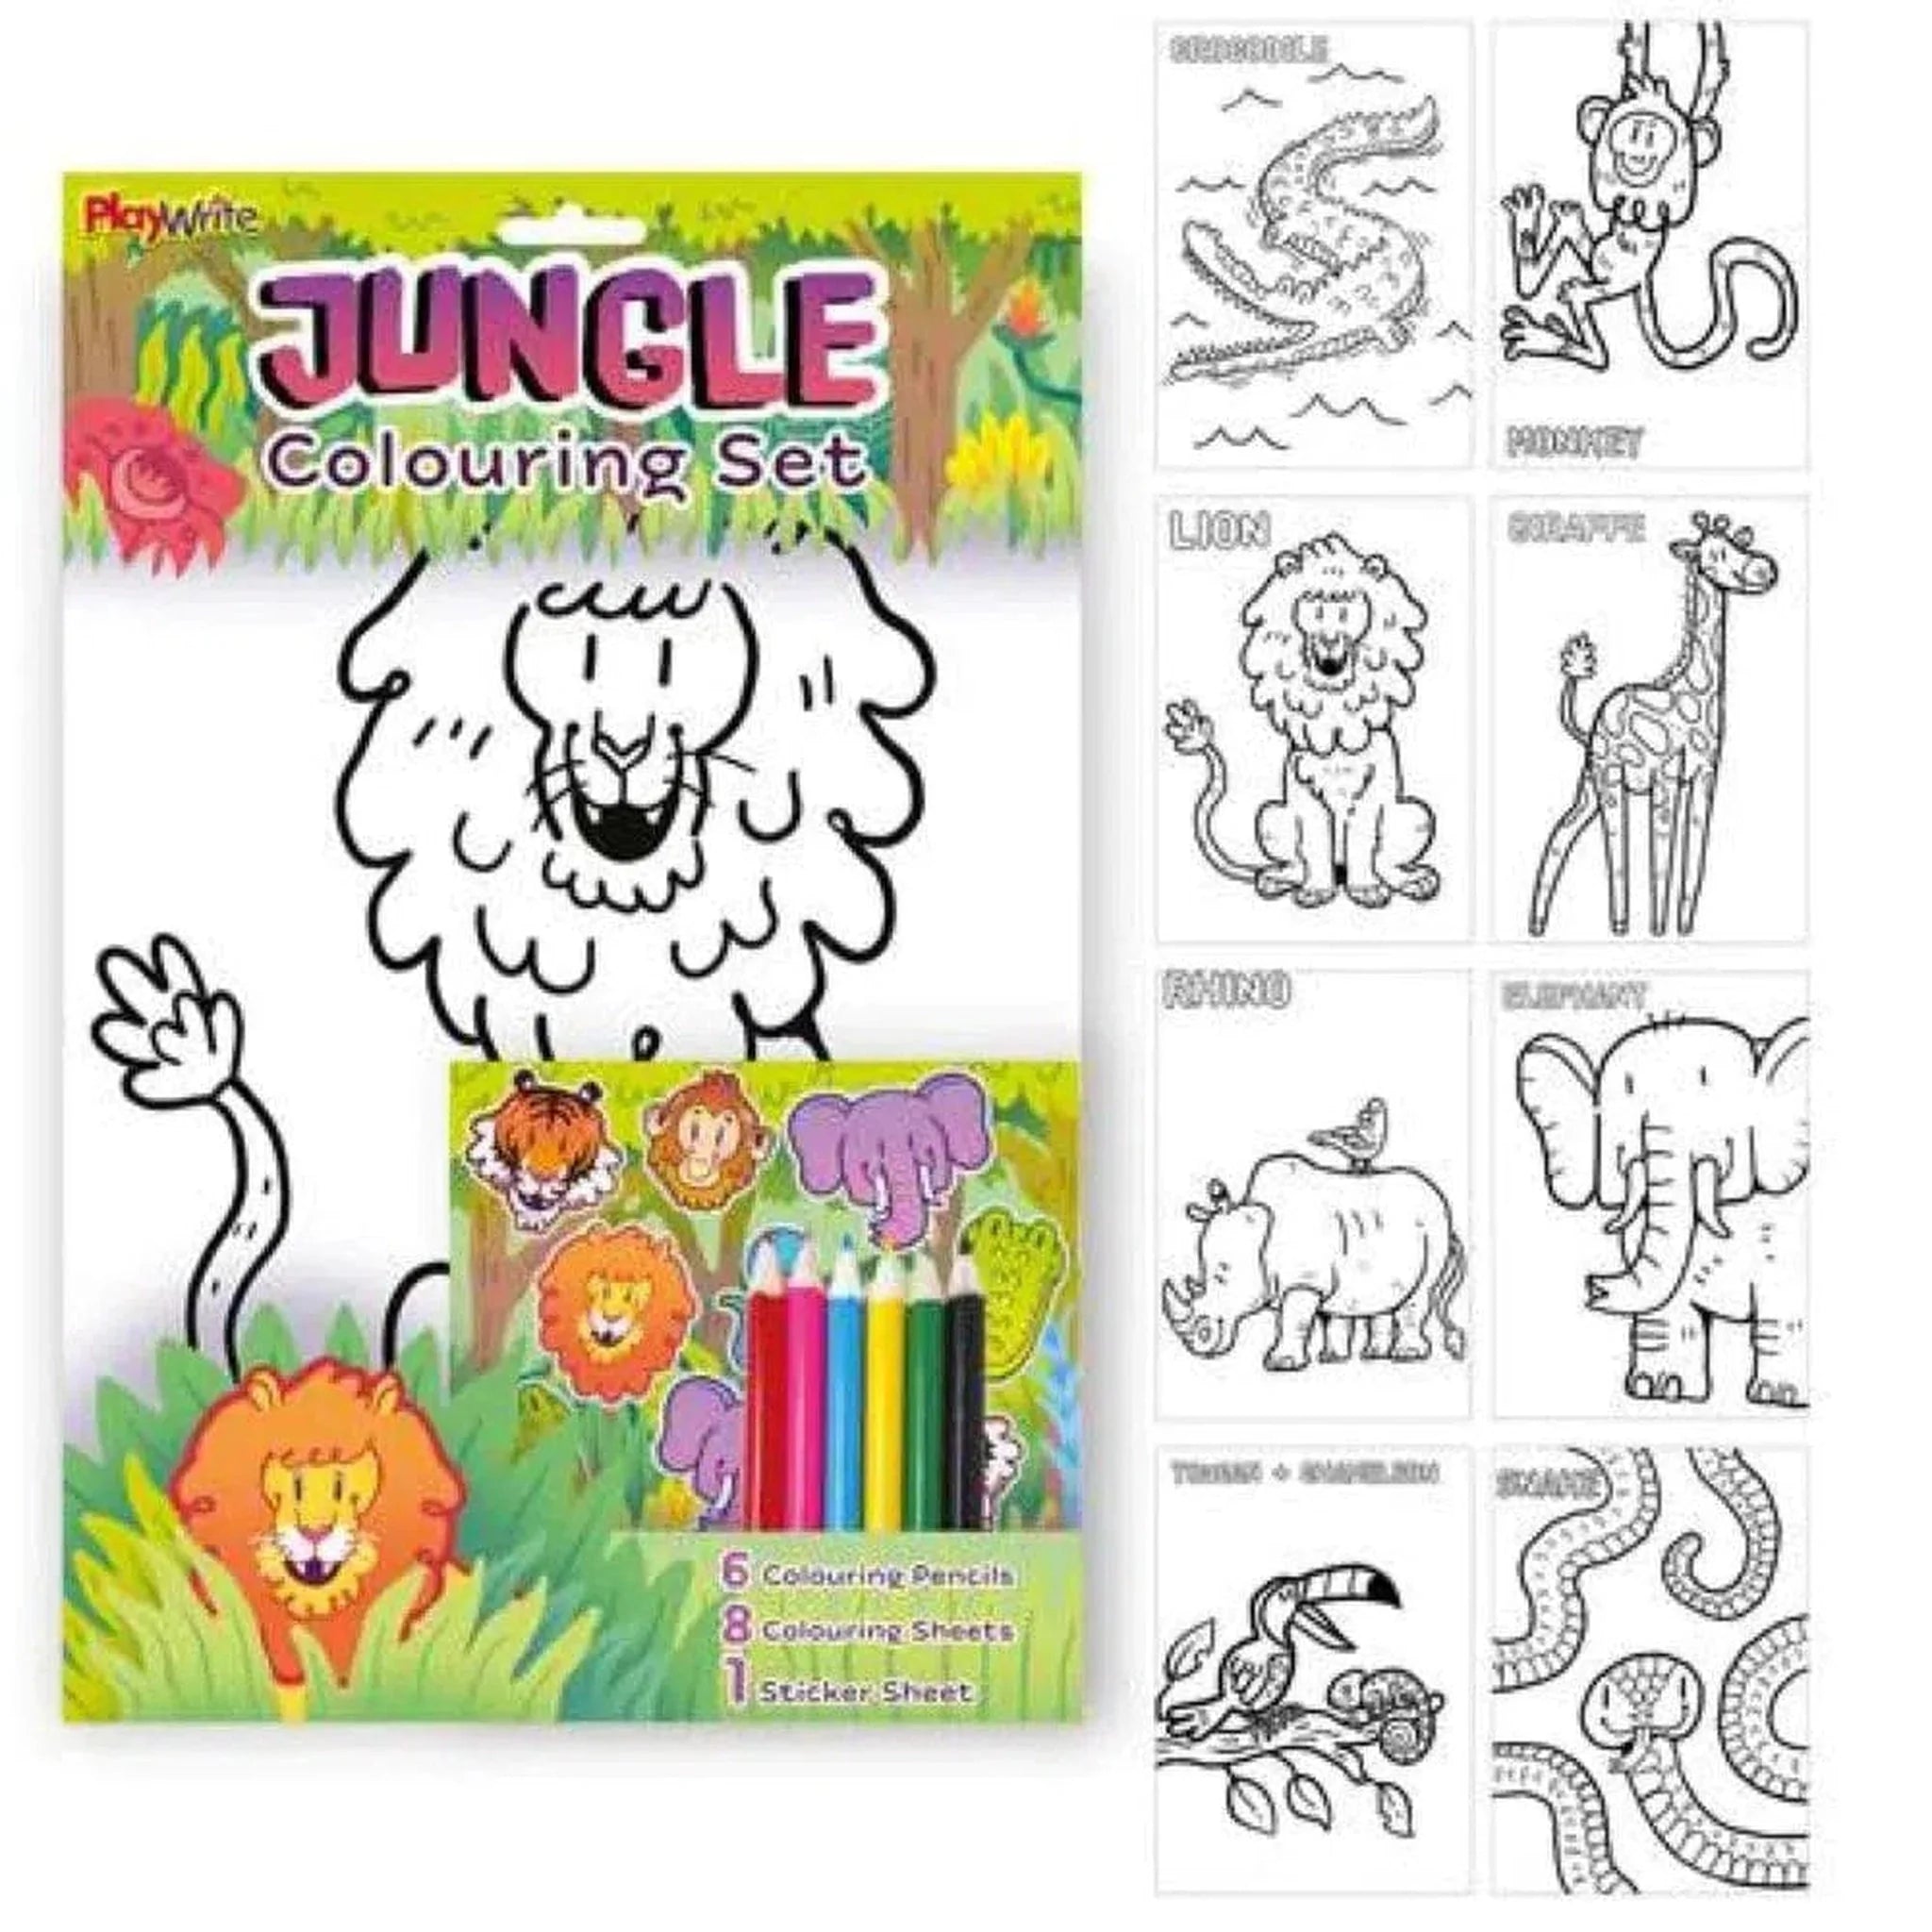 Jungle Colouring Activity Pack - Kids Party Craft